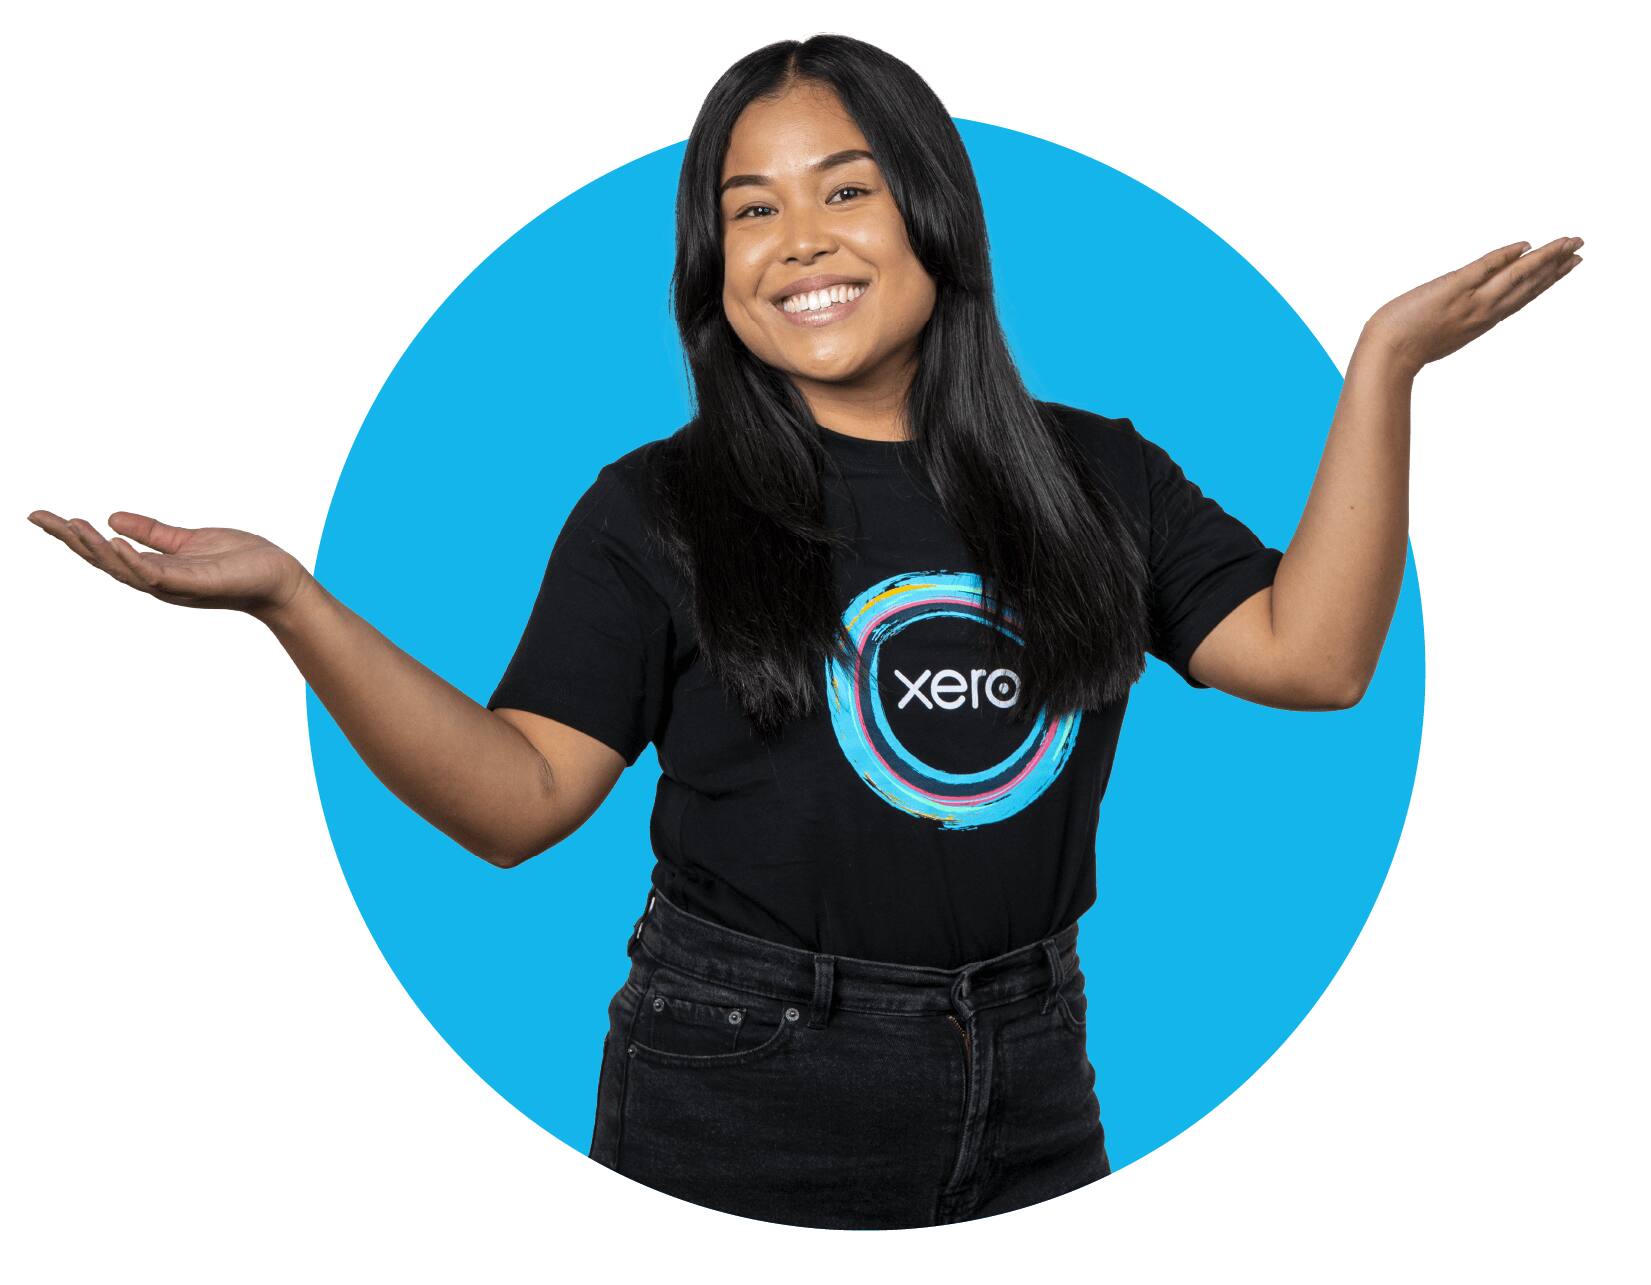 A photo of a Xero employee with a welcoming smile.